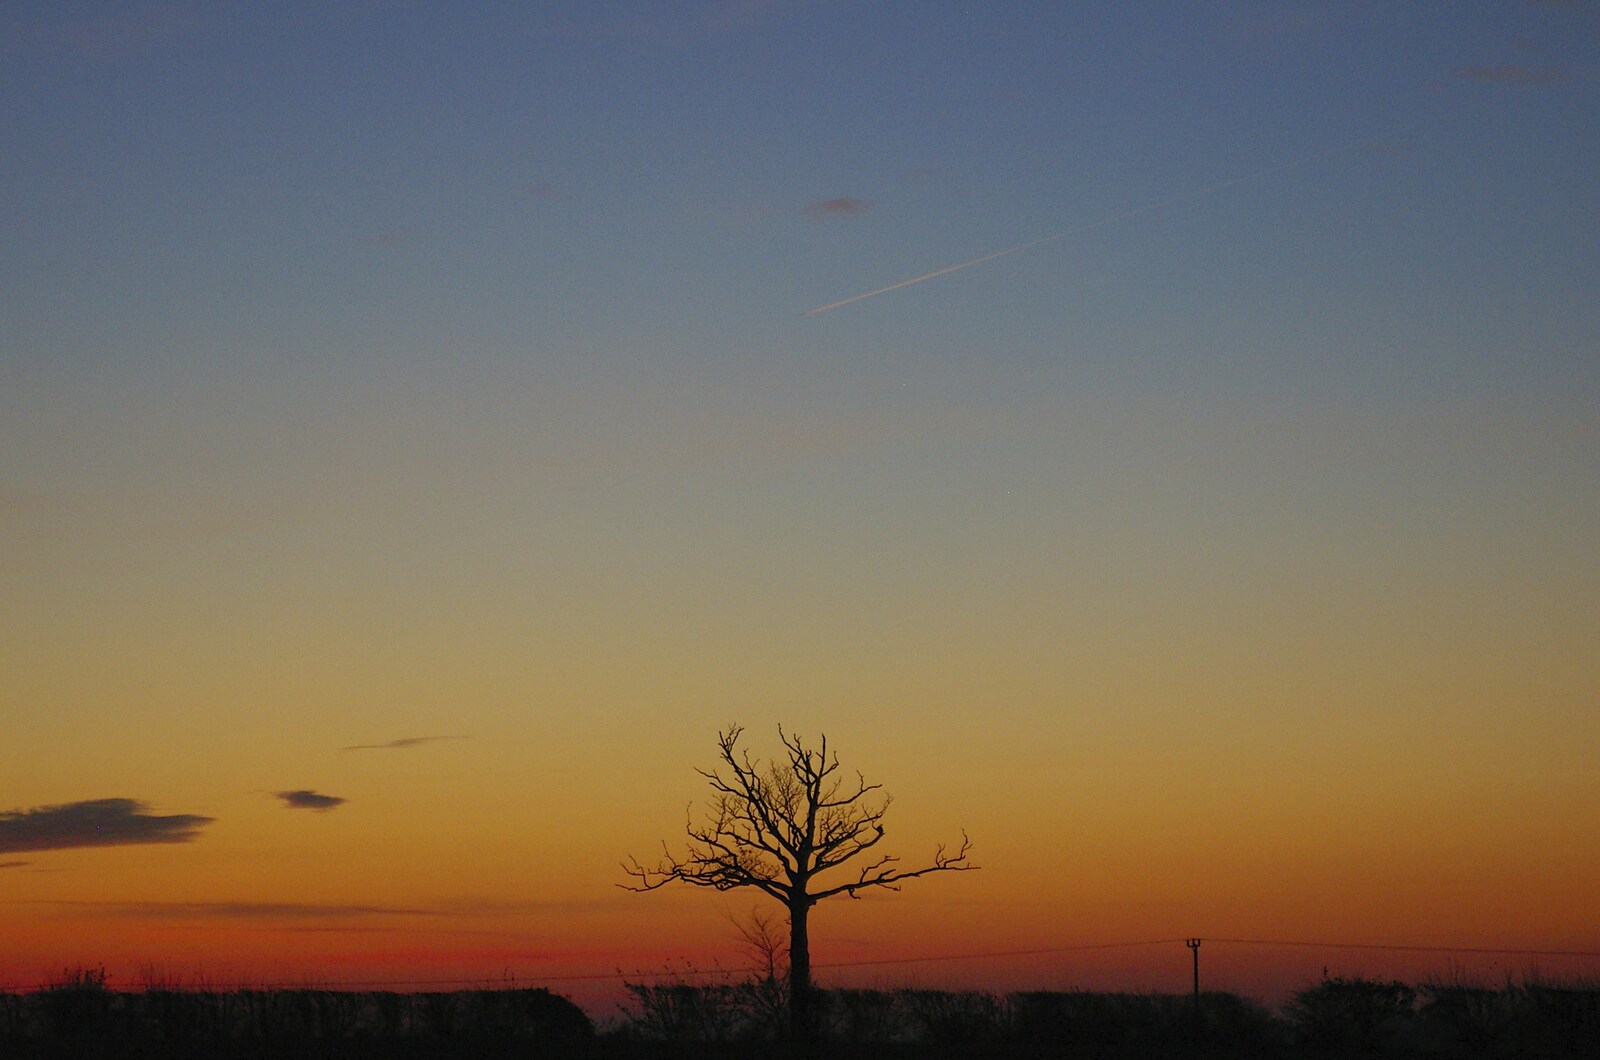 The lonely tree, outside Occold from Pheasants, Sunsets and The BBs at Bressingham, Norfolk - 11th December 2005